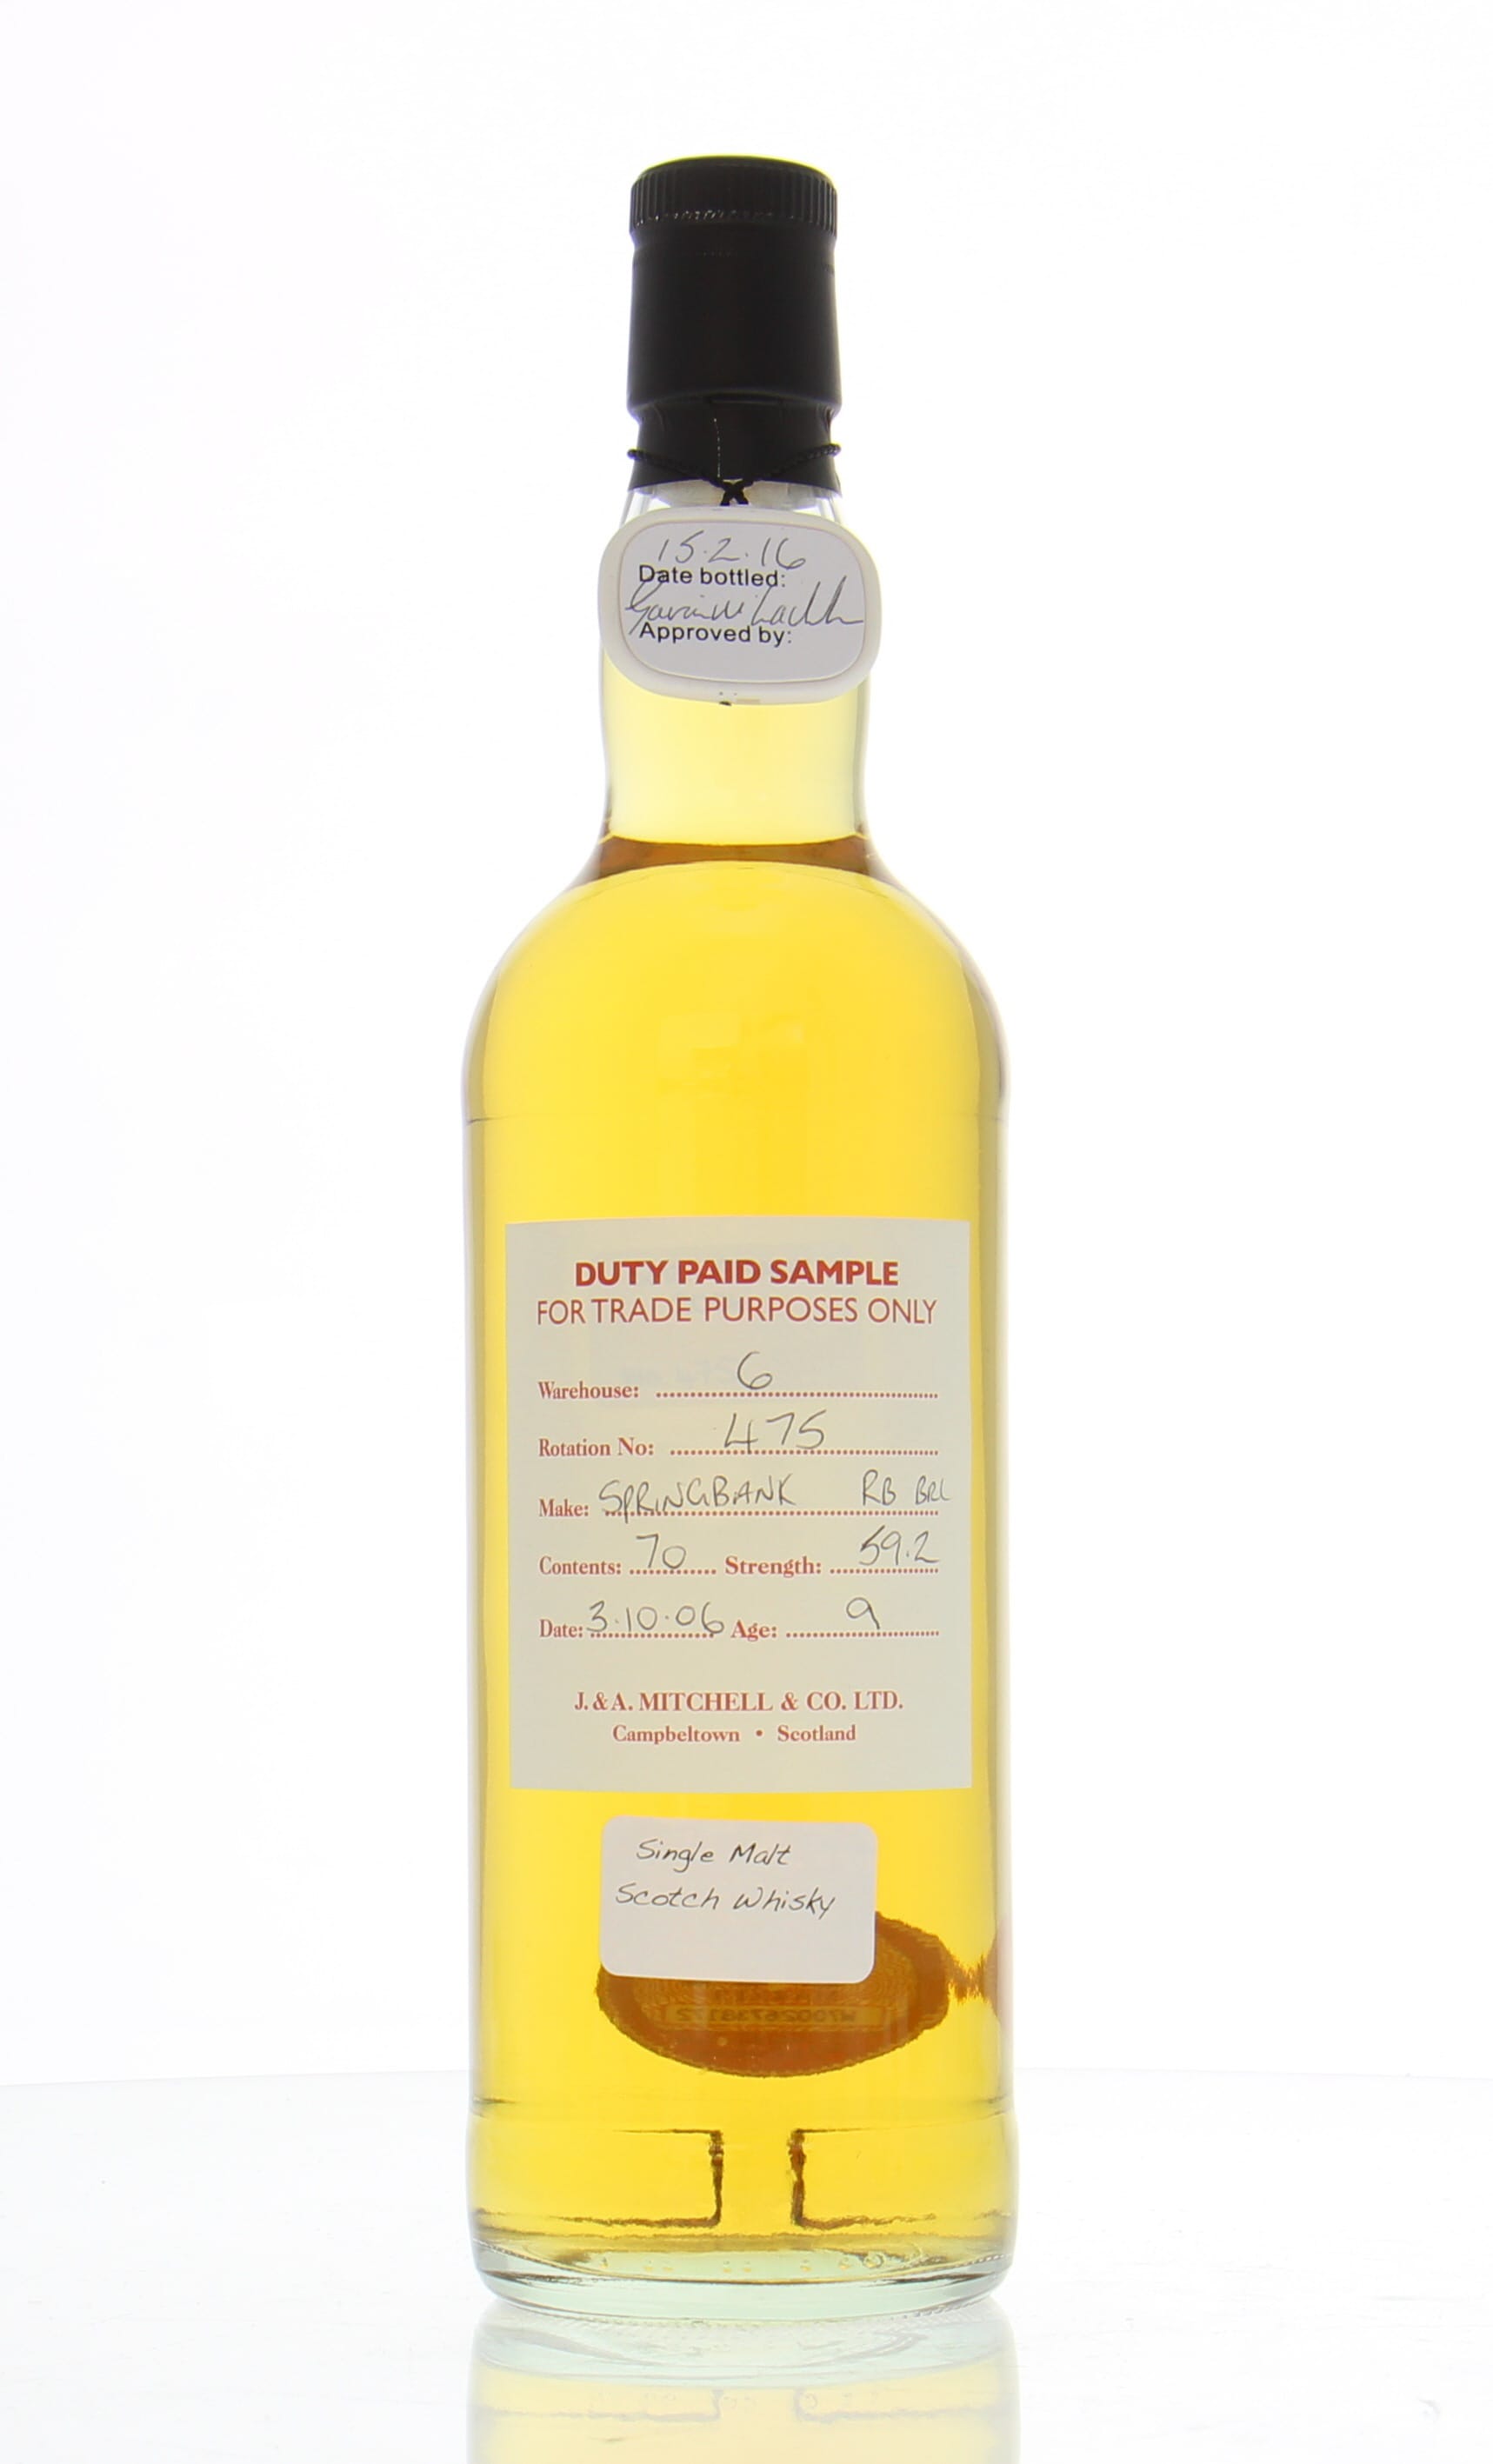 Springbank - 9 Years Old Duty Paid Sample Warehouse 6 Rotation 475 59.2% 2006 Perfect